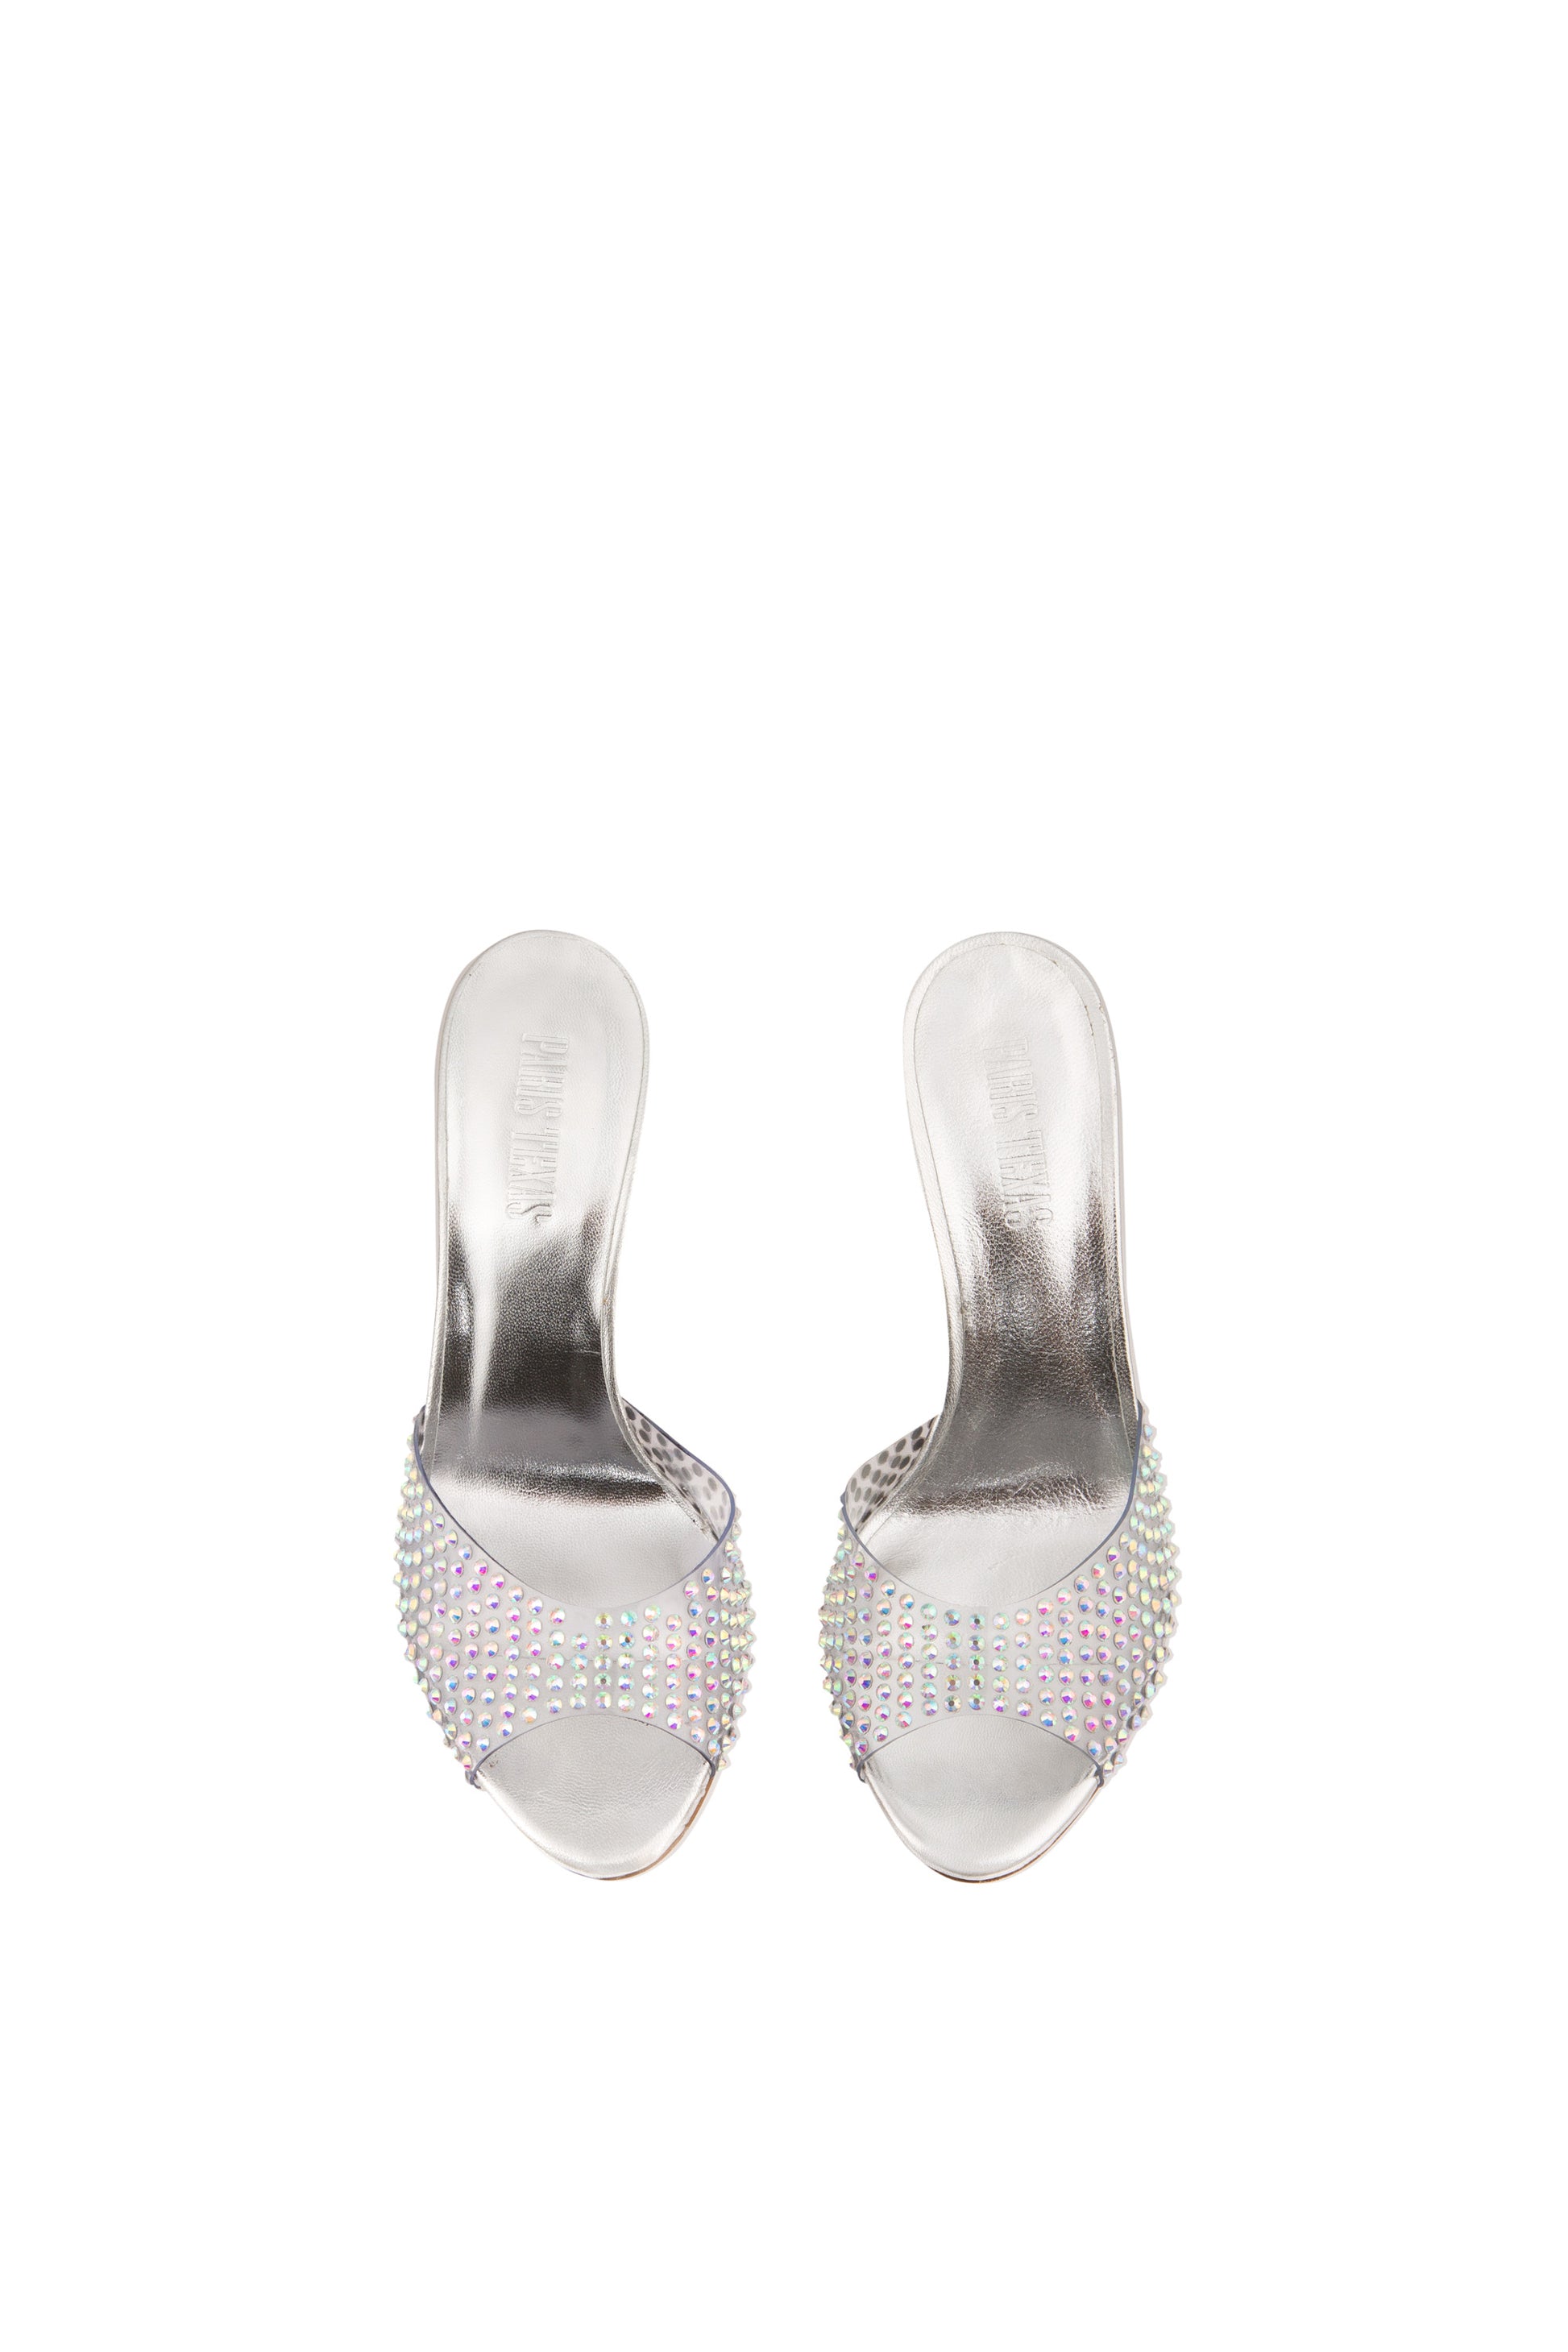 Embellished clear pvc mules - Top view